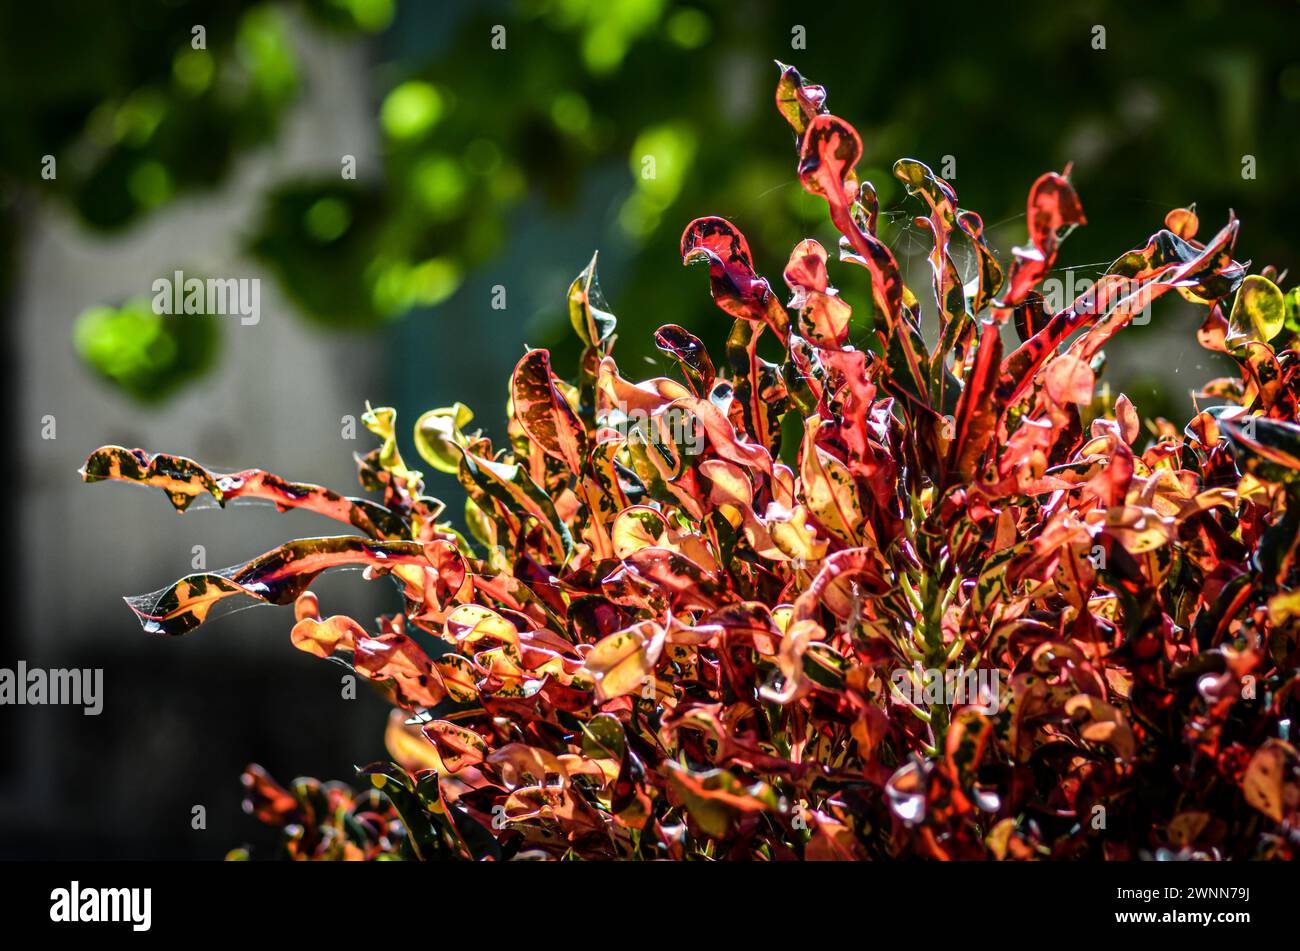 Close-up of green, scarlet, orange, and yellow splotches of Croton plant with spiderwebs throughout it, blurred background with room for text. Stock Photo